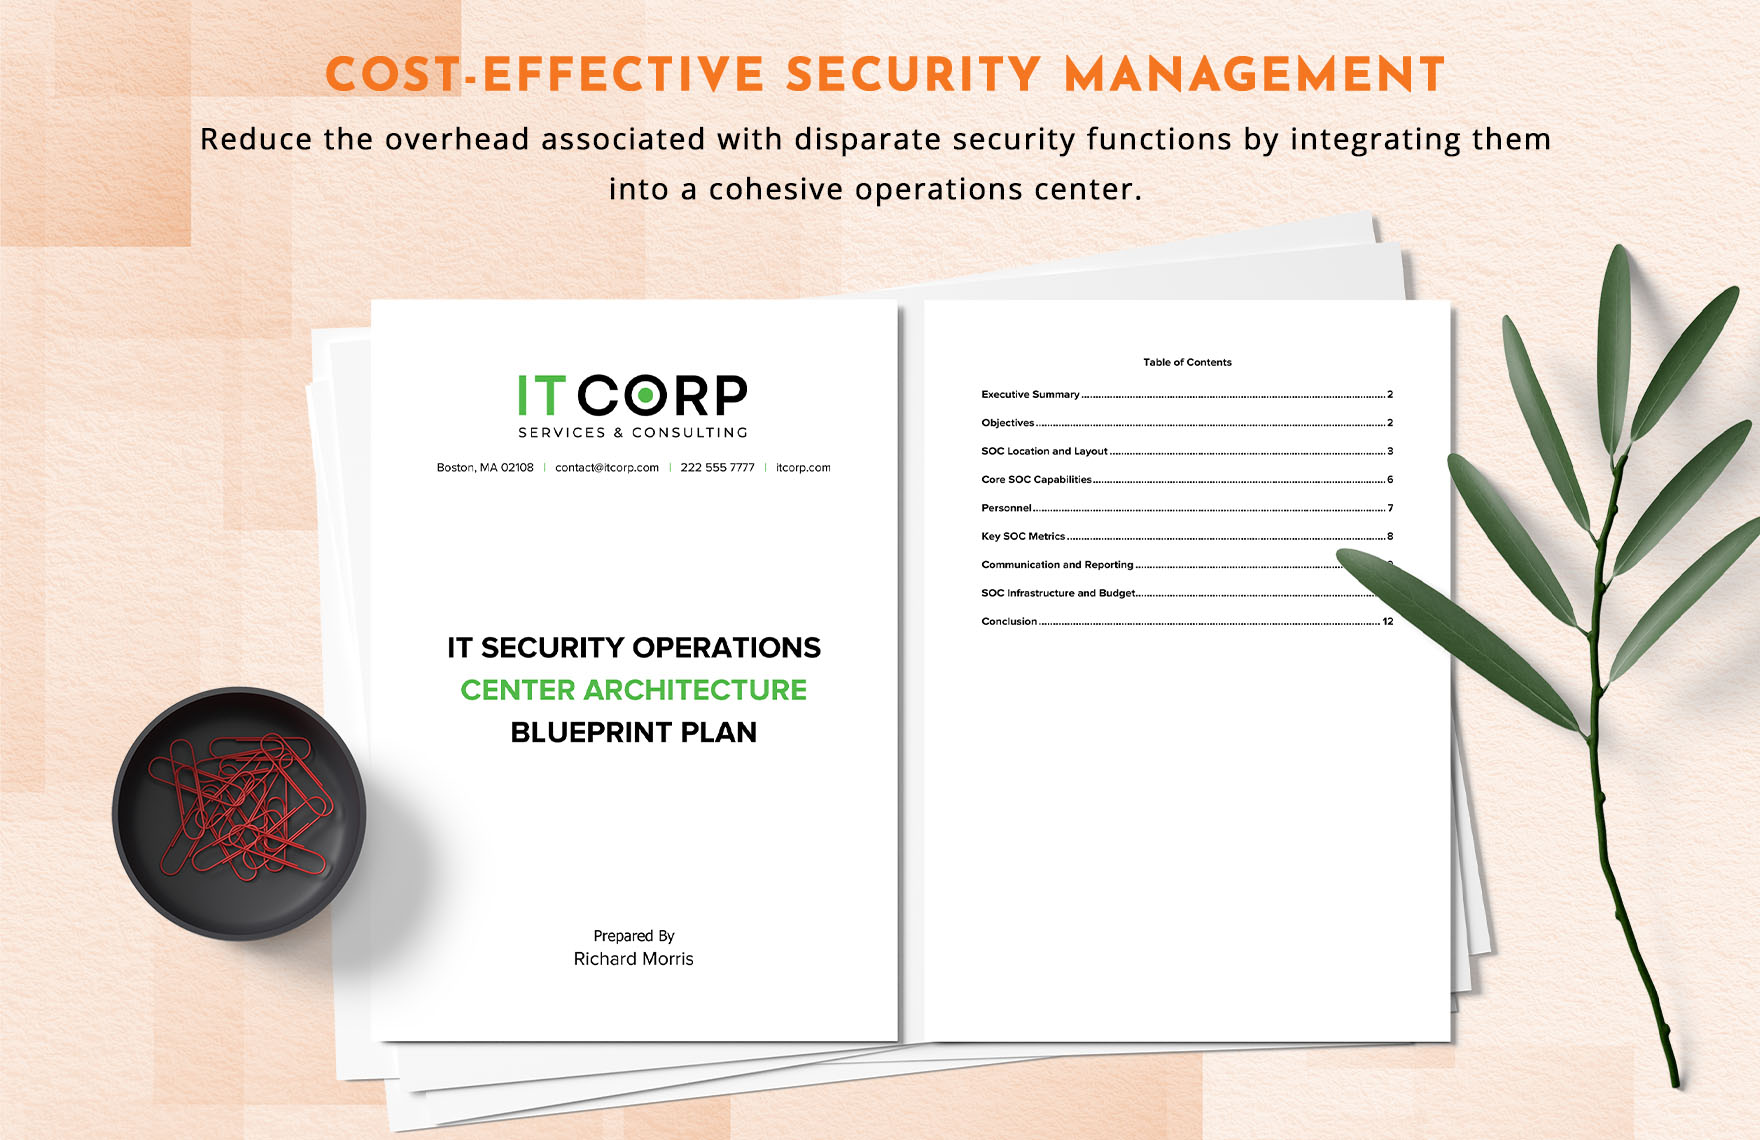 IT Security Operations Center Architecture Blueprint Plan Template